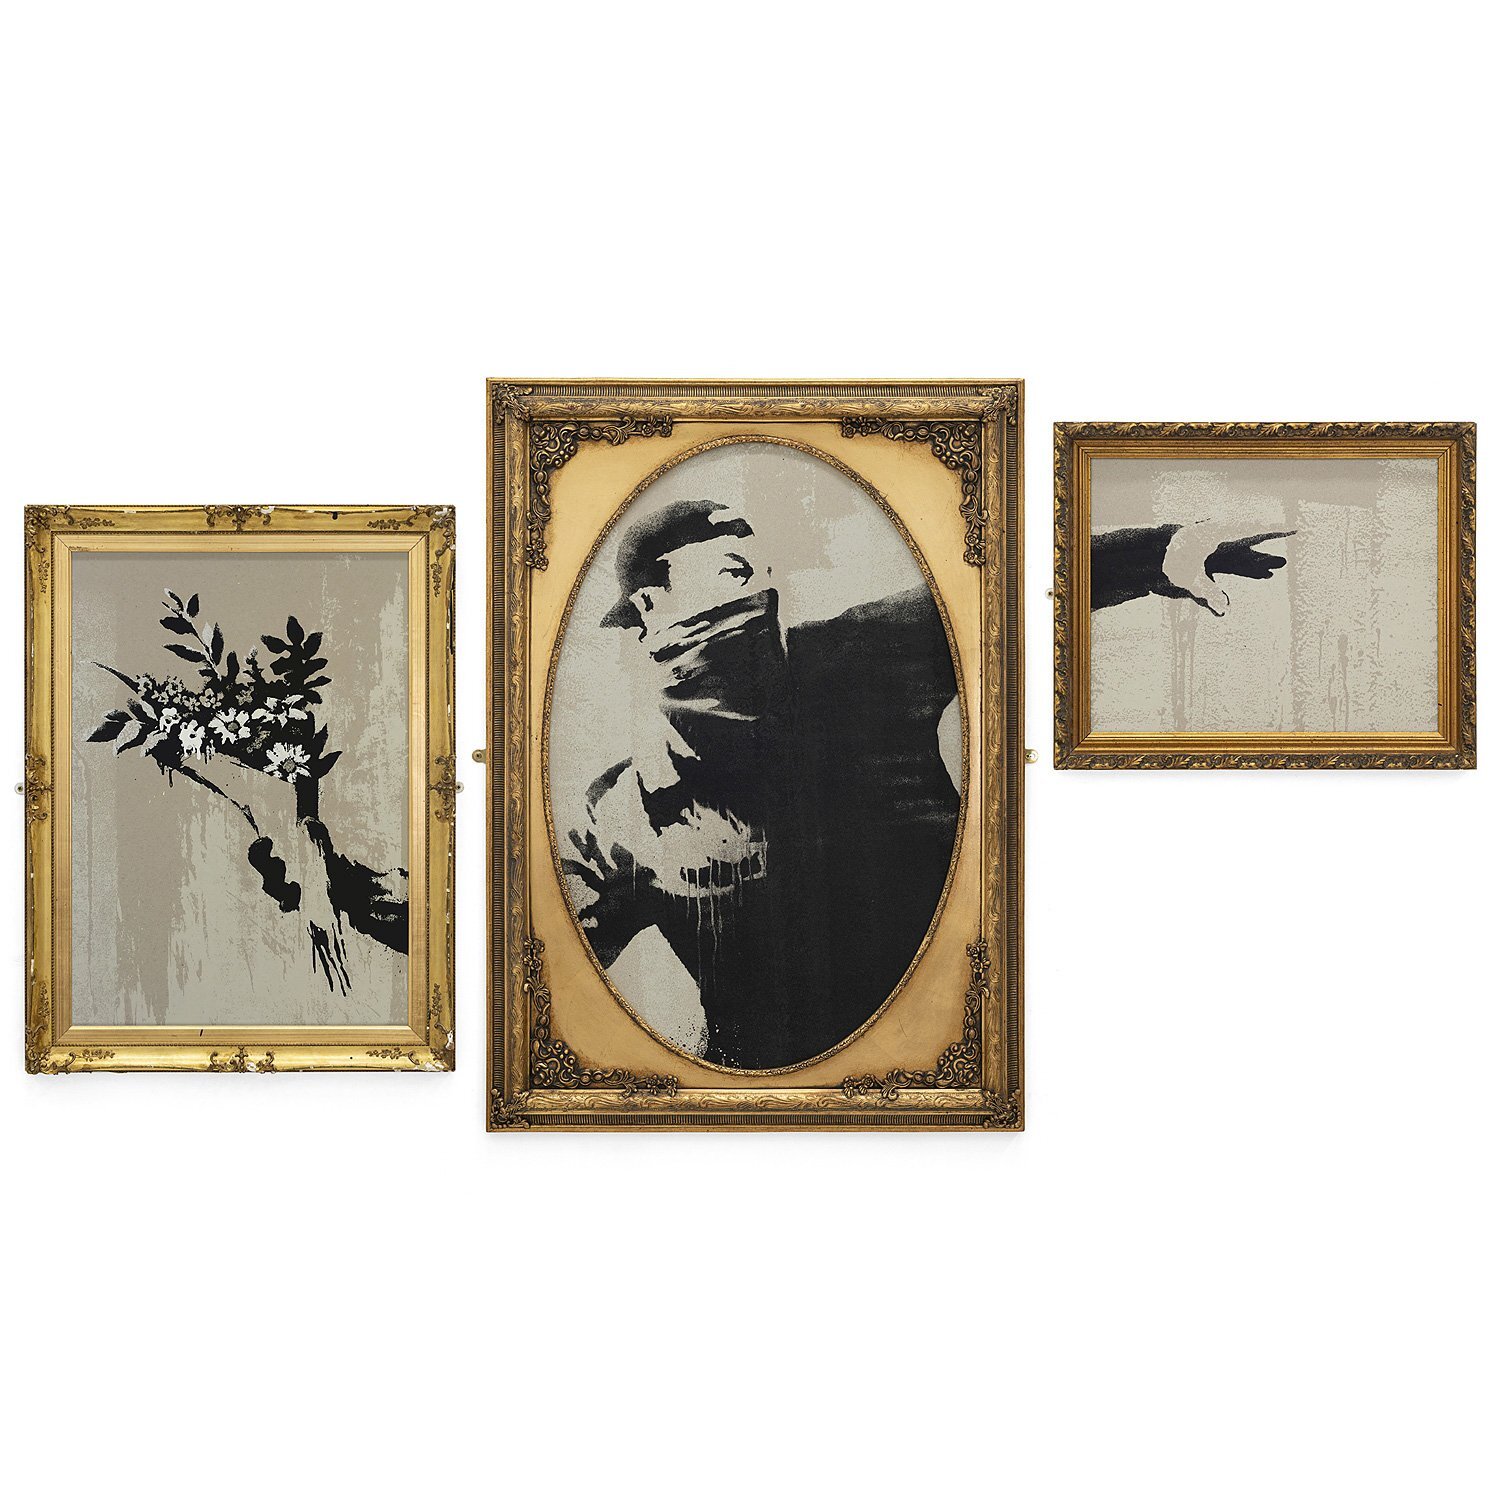 Gross Domestic Product - The Homewares Brand from Banksy